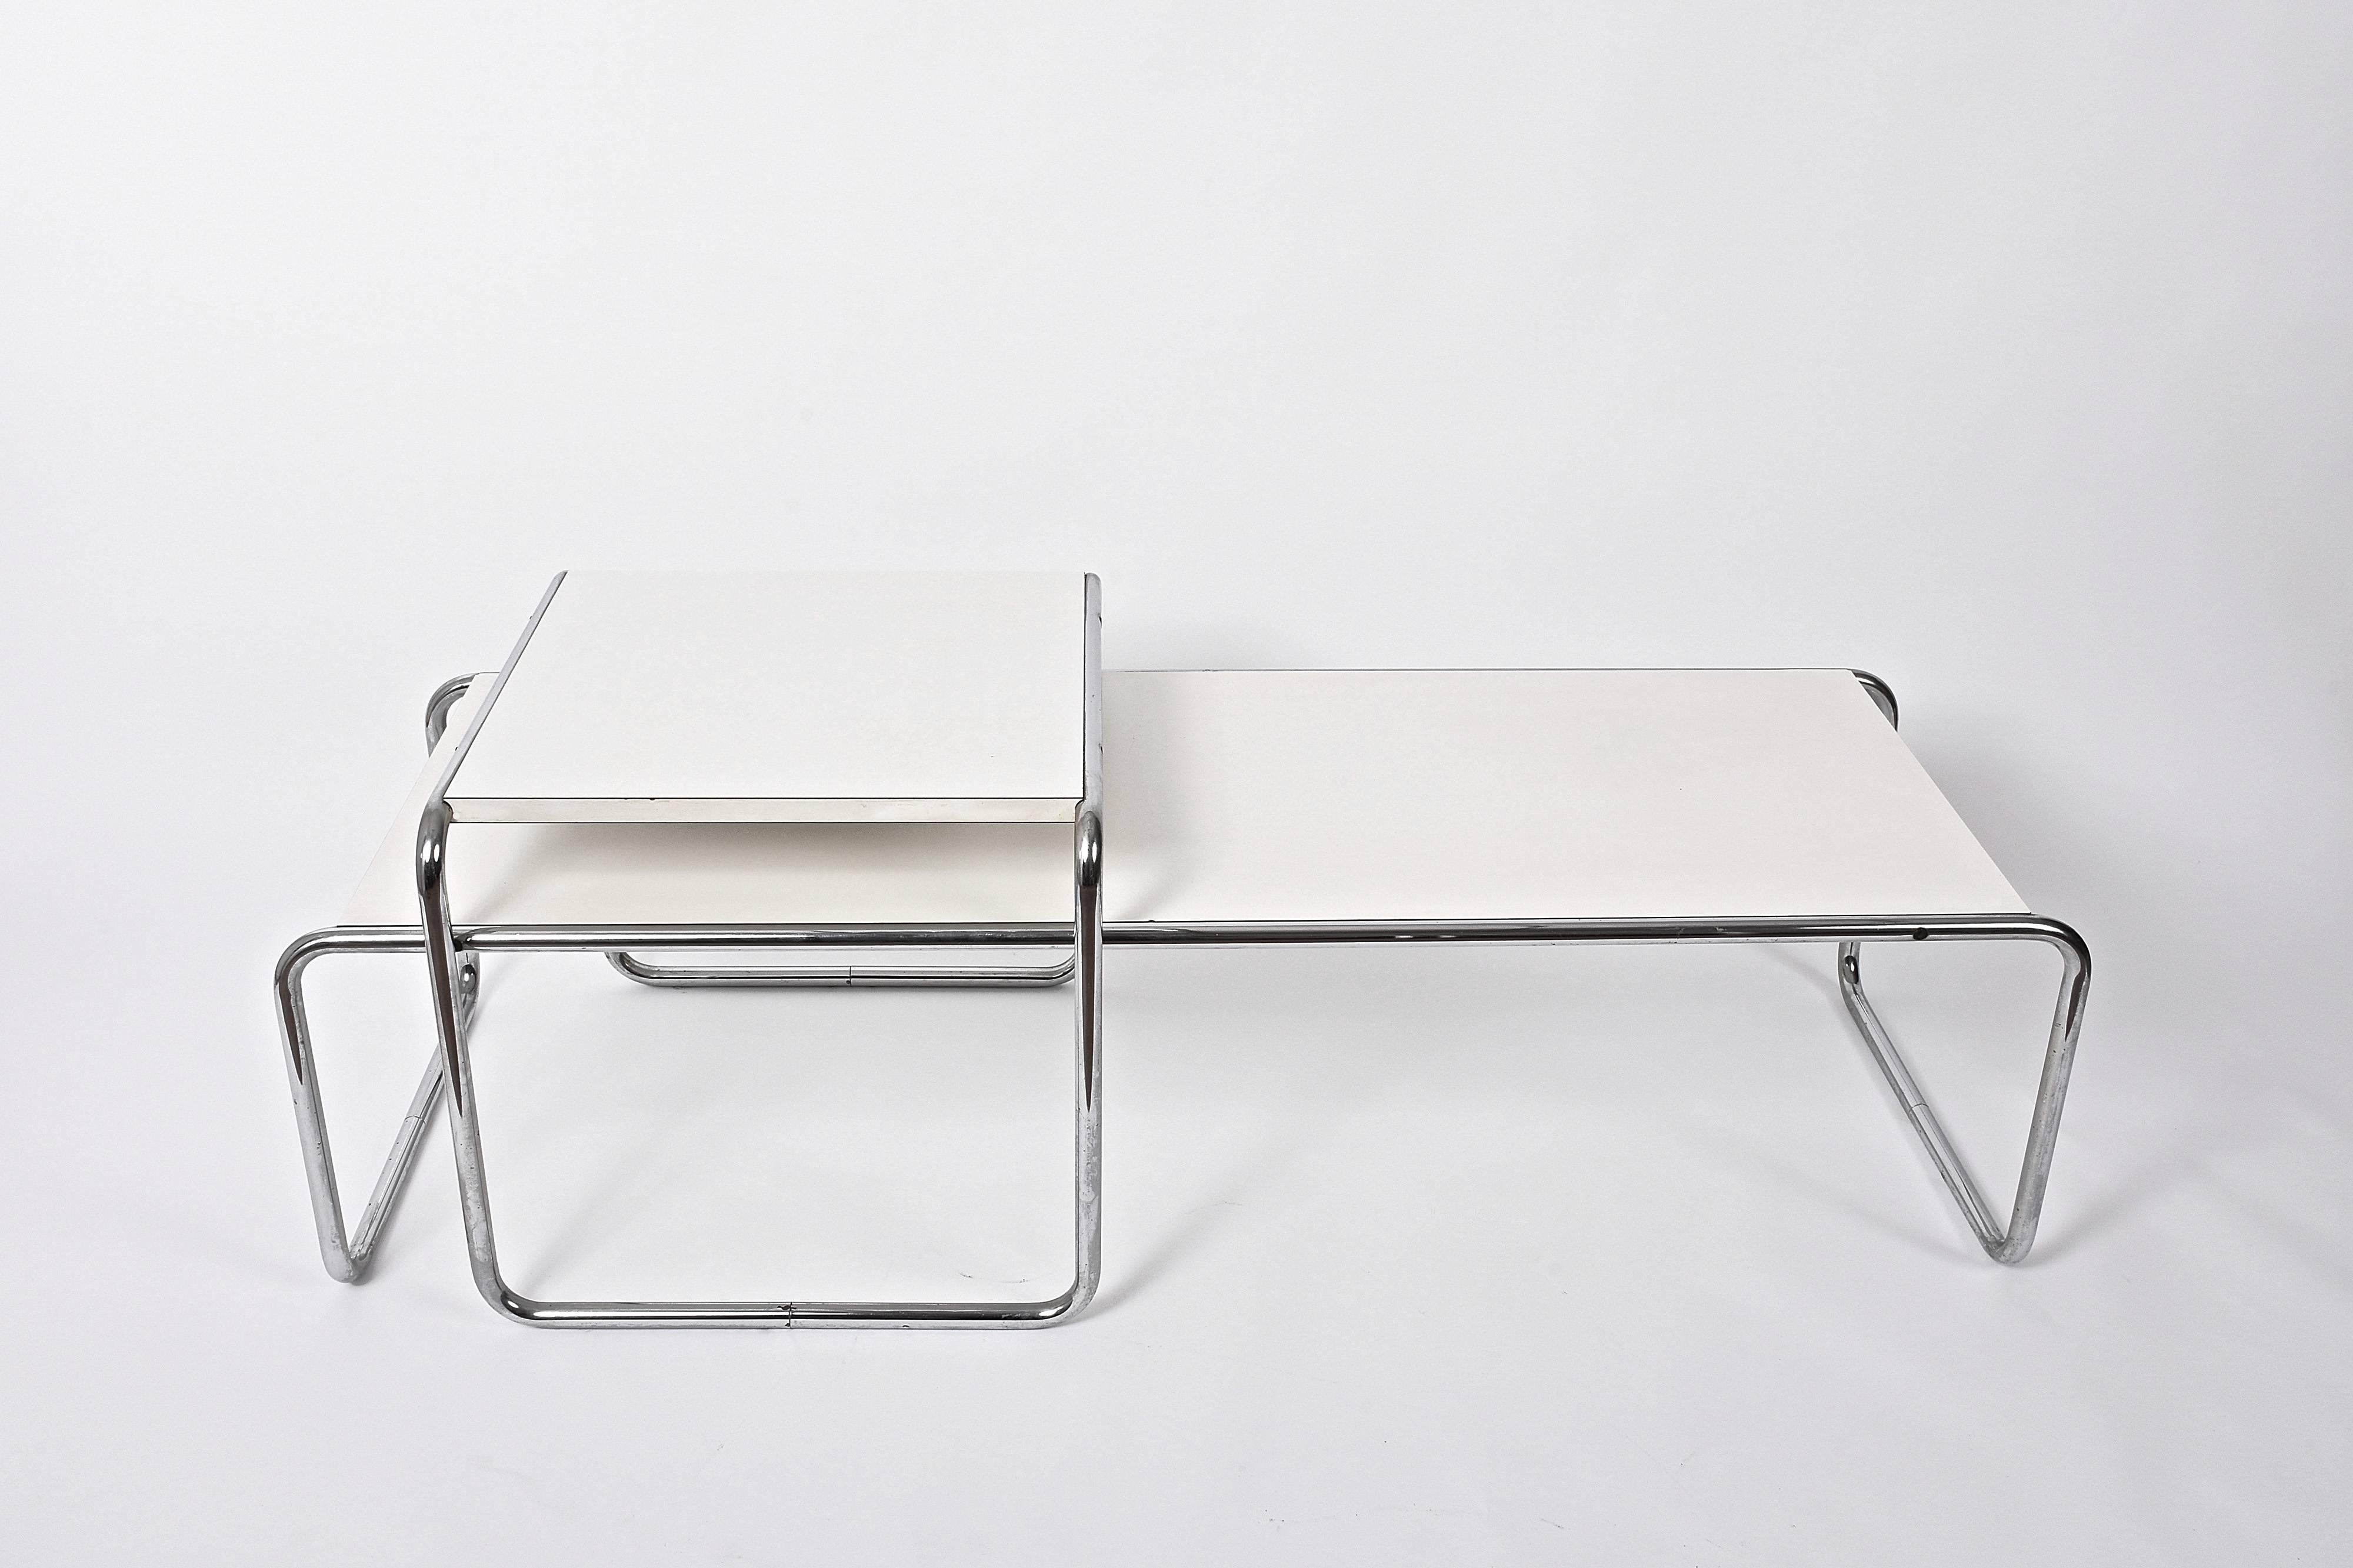 Marvelous Marcel Breuer white laminated wood and steel 'Laccio' side table, in Bauhaus style. These items were produced in Italy during the 1970s.

The essential elegance of the lines underlines enhance the amazing functionality and flexibility of